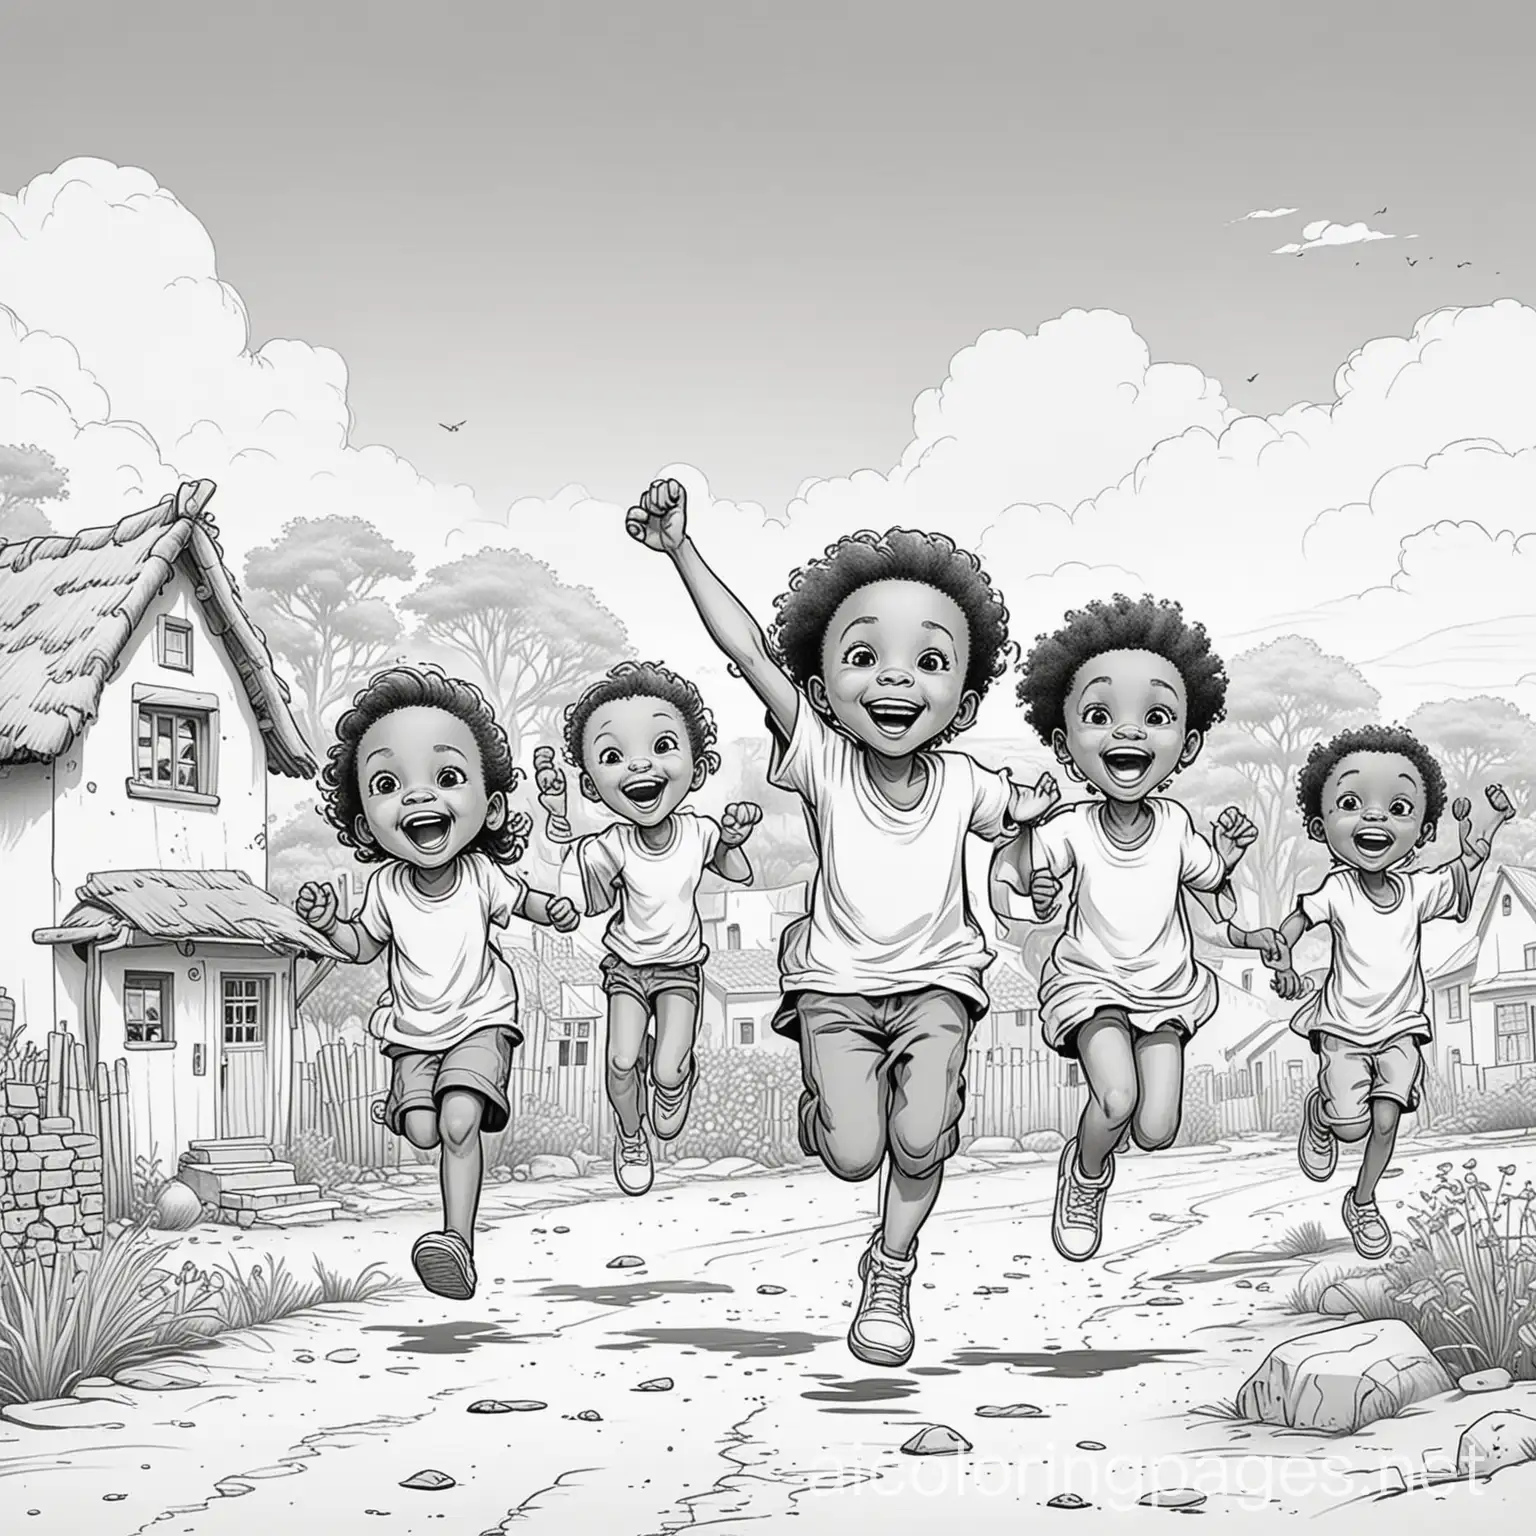 cartoon drawing of cute excited african children, with no skin colour, jumping up and down, with the village in the background, Coloring Page, black and white, line art, white background, Simplicity, Ample White Space. The background of the coloring page is plain white to make it easy for young children to color within the lines. The outlines of all the subjects are easy to distinguish, making it simple for kids to color without too much difficulty